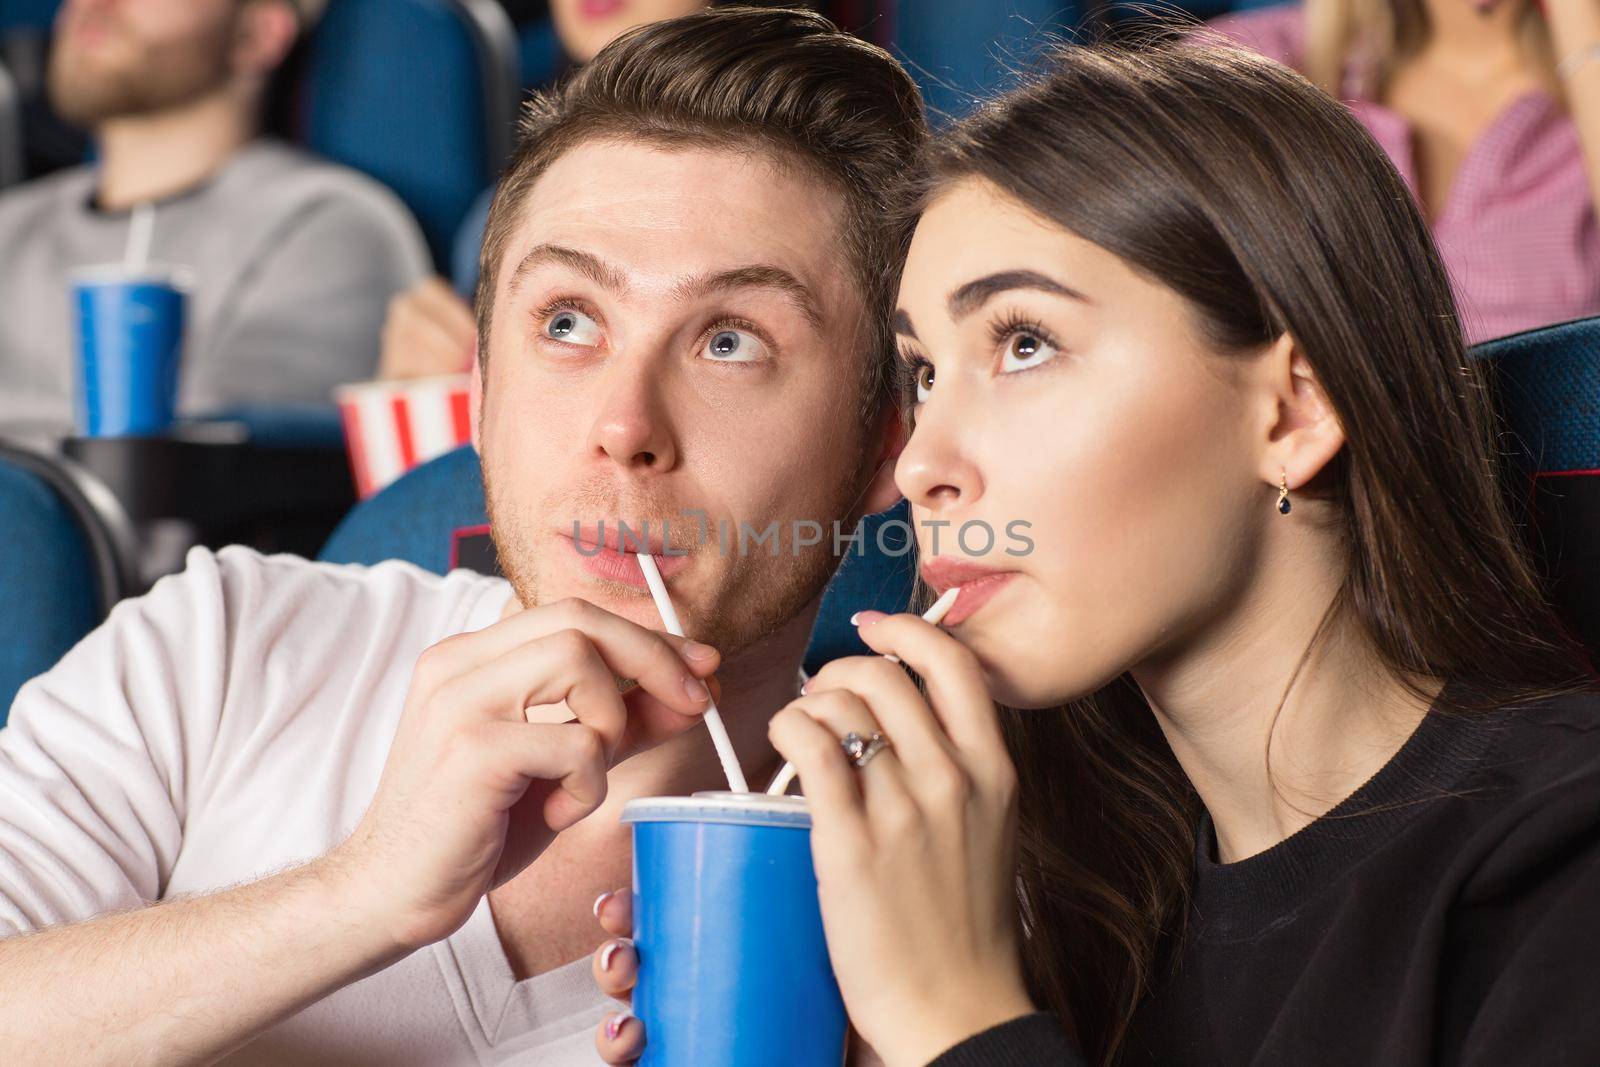 So fascinating. Closeup shot of a young loving drinking the same drink together with two straws in watching movies at the local cinema